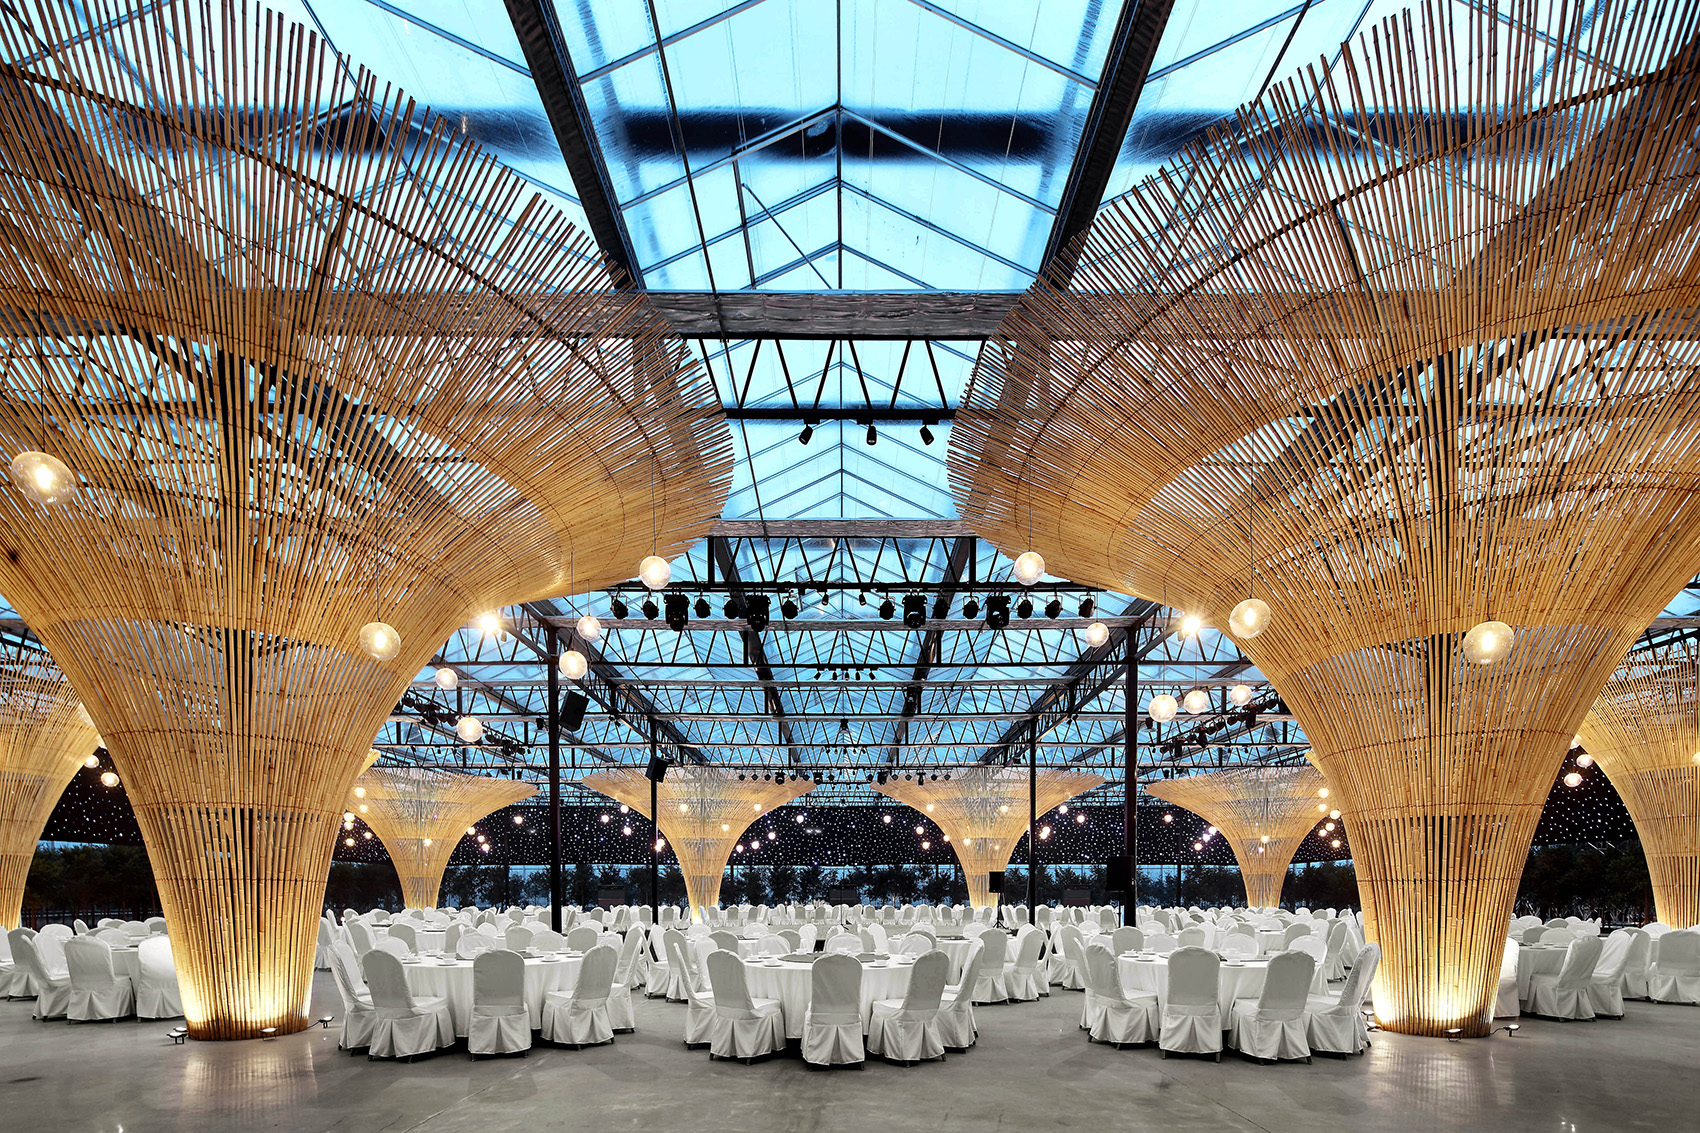 MIX Architecture renovated the sun shed of Chun Qin Yuan Ecological Farm into a large hall for various activities with tree-like pillars